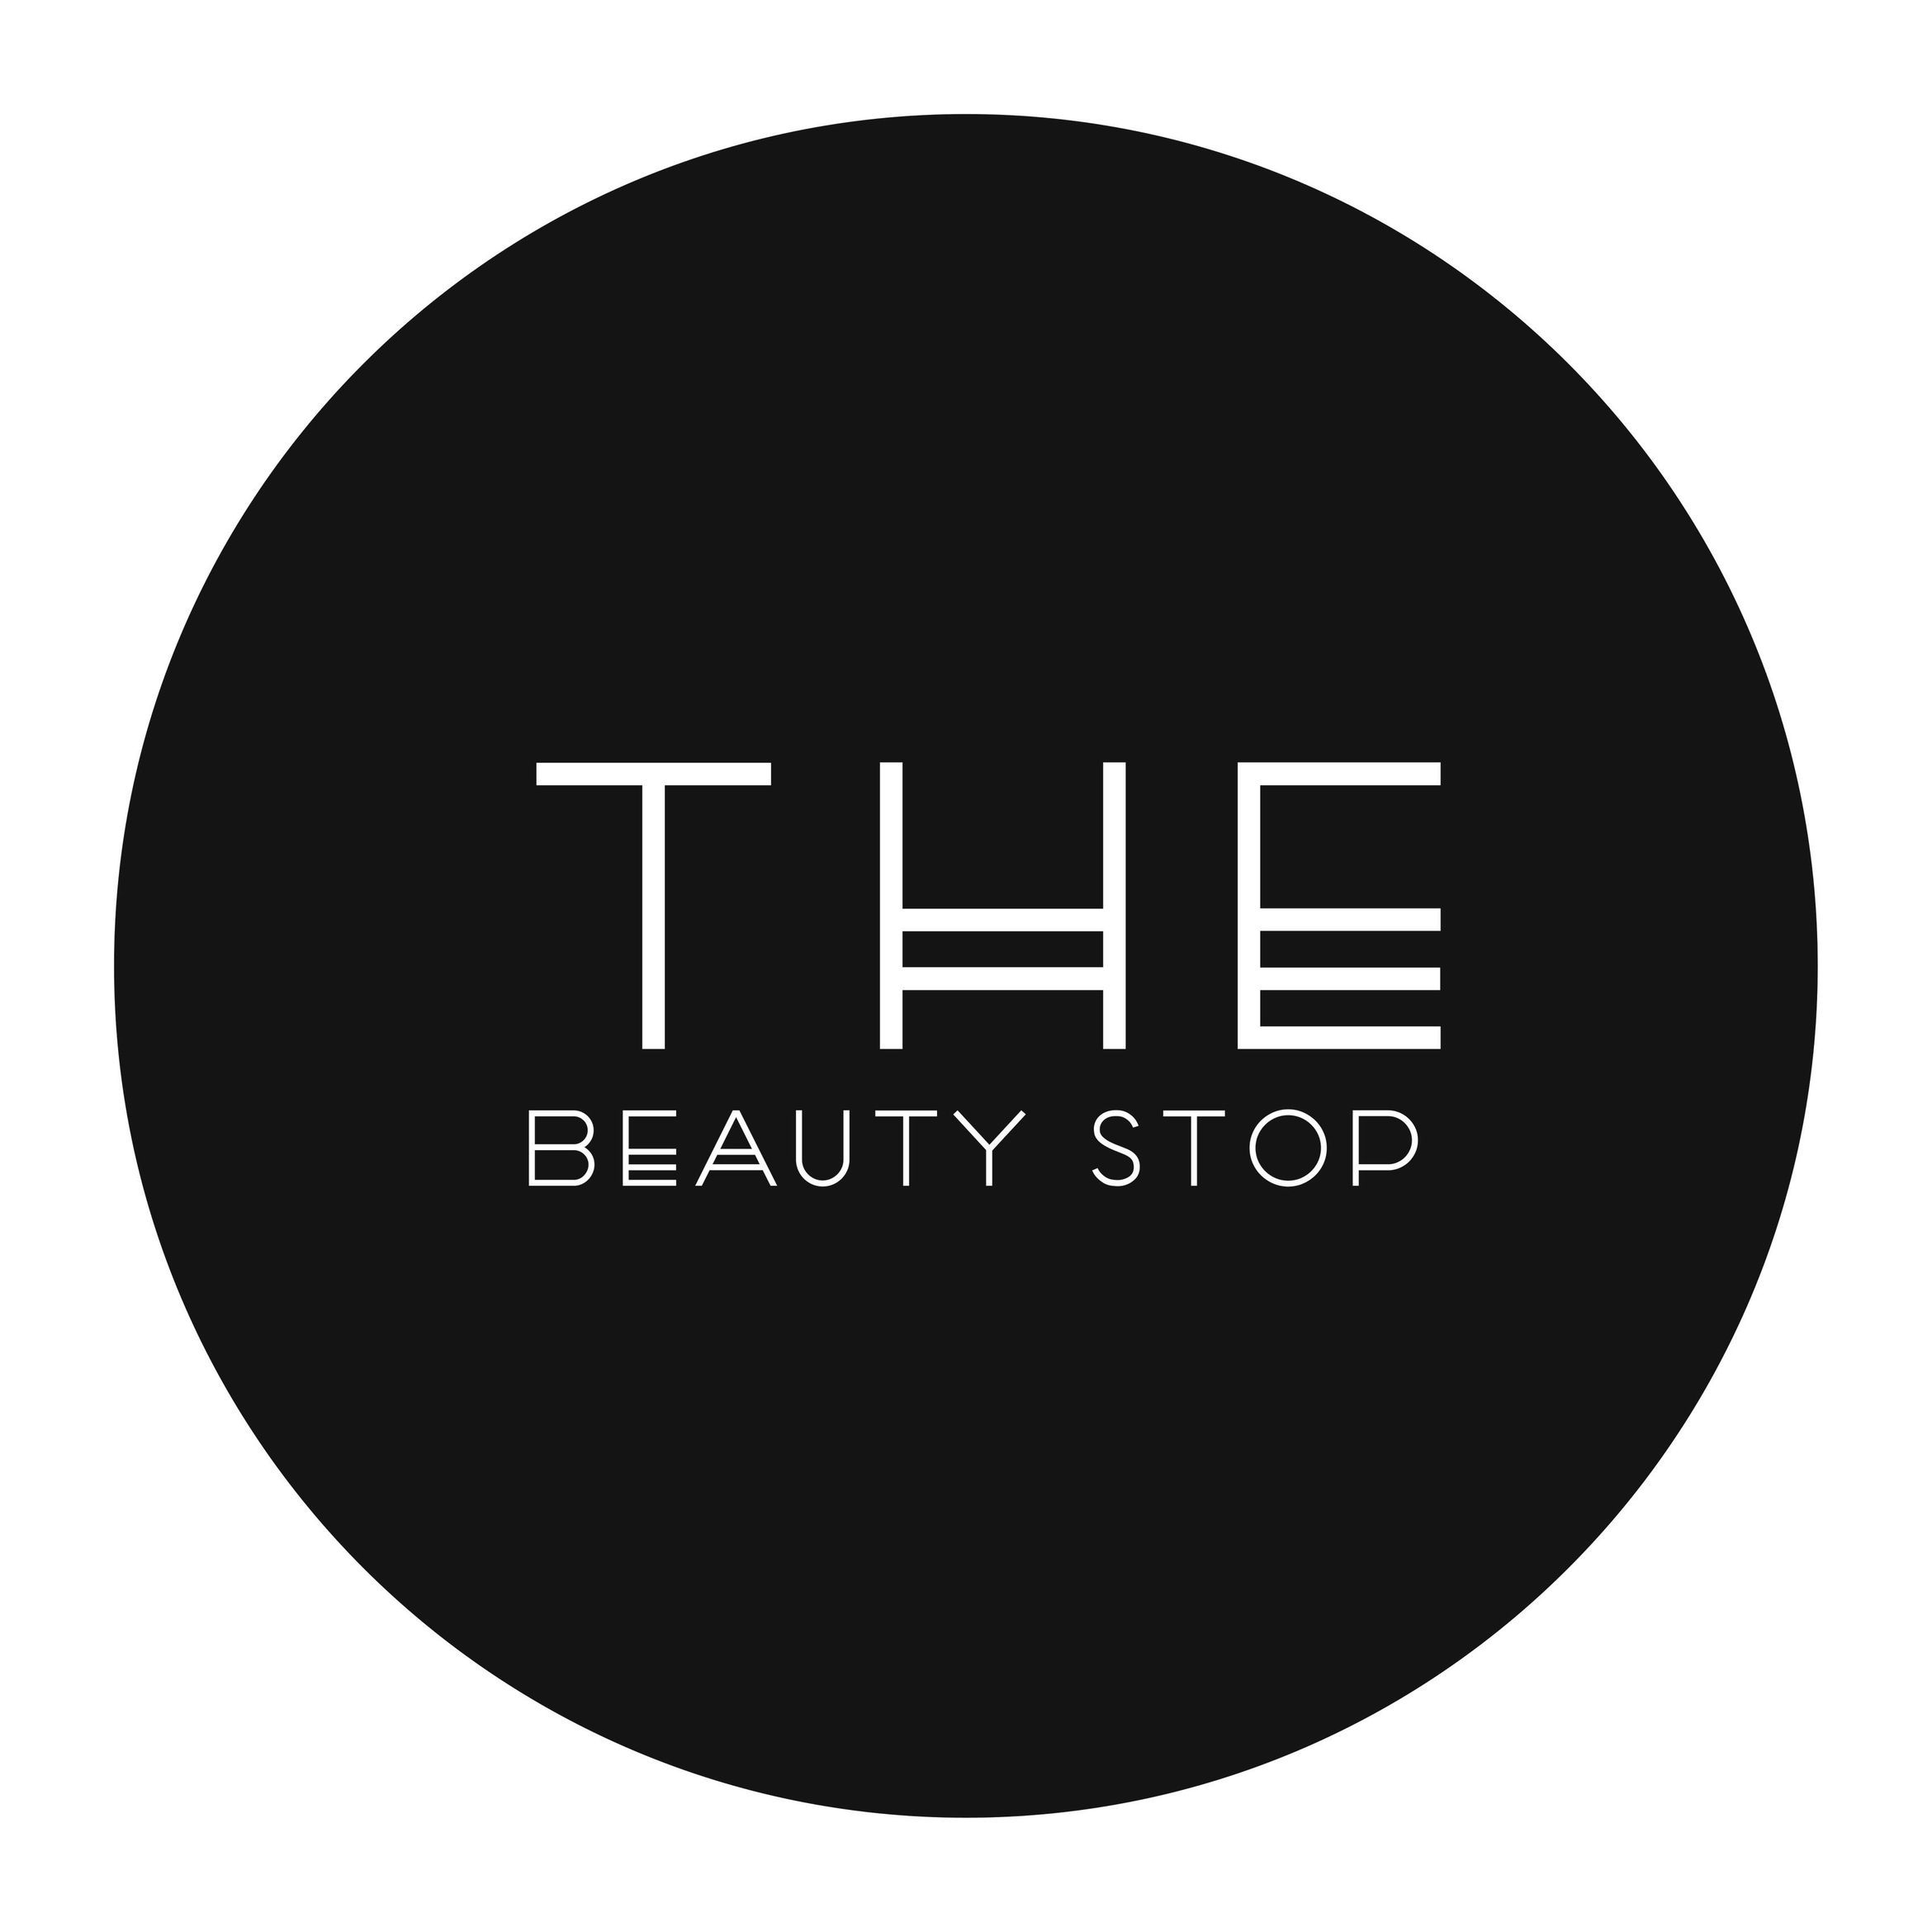 TheBeautySTOP, 2257 Cong W L Dickinson Dr, Montgomery, 36109